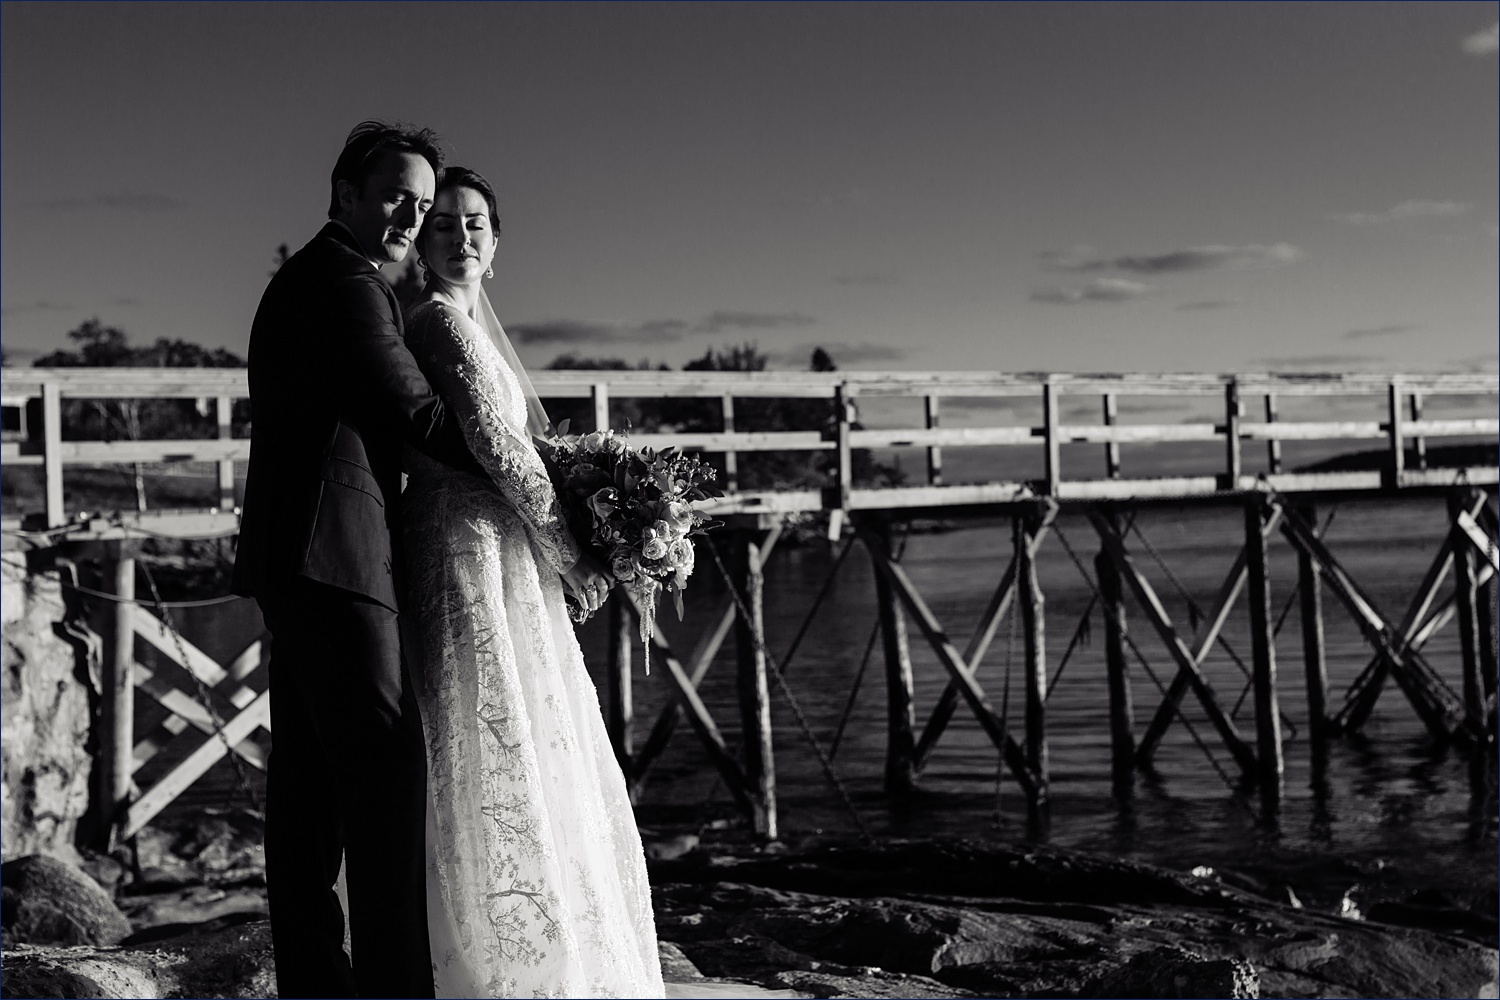 The newlyweds stand in front of the dock of Spruce Point Inn Resort in Midcoast Maine on their intimate wedding day